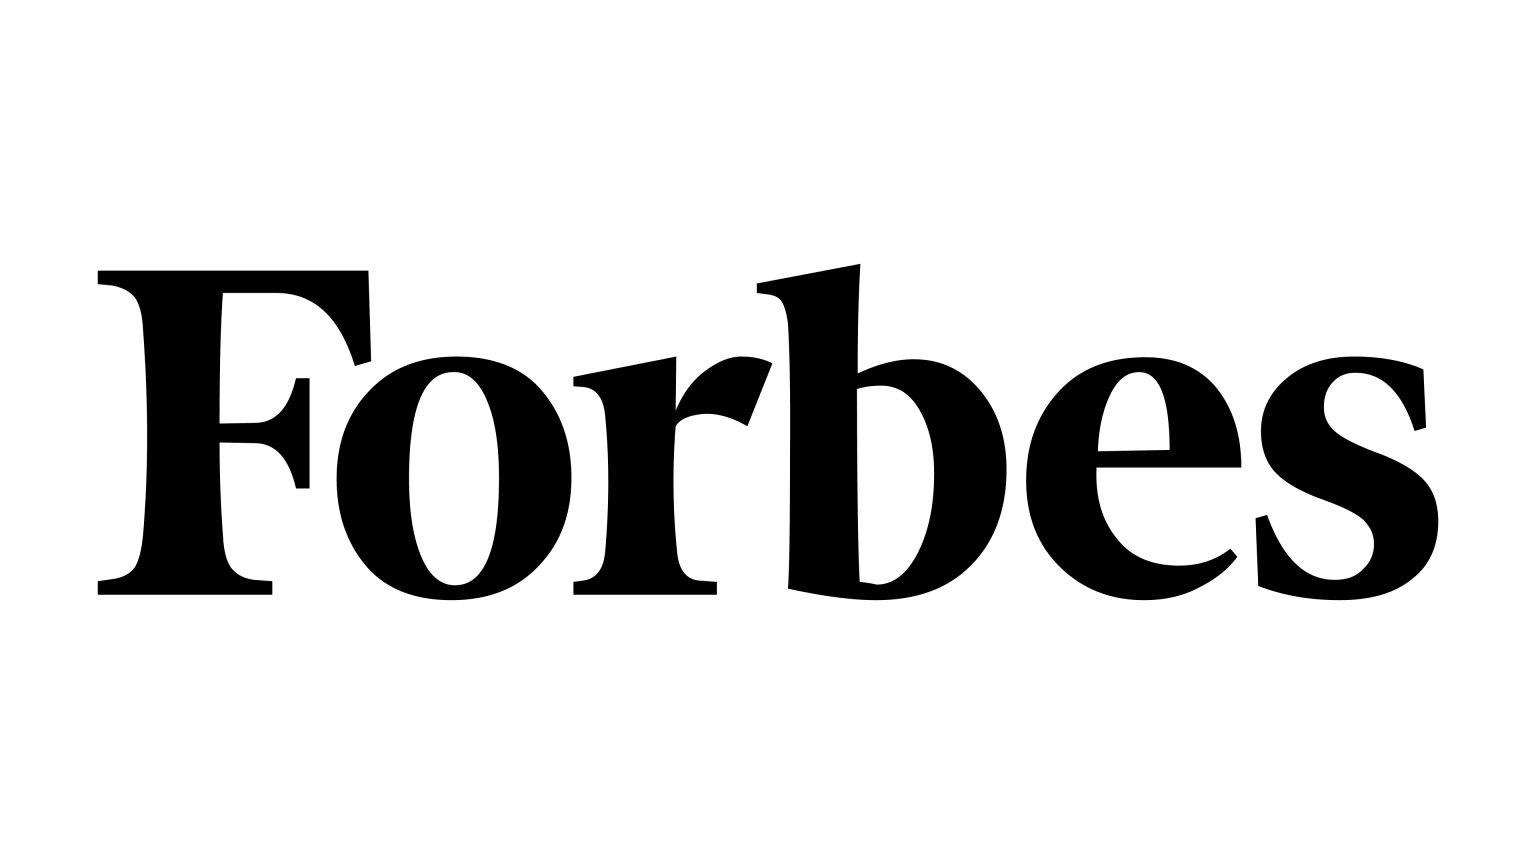 Forbes-logo-1536x864.png